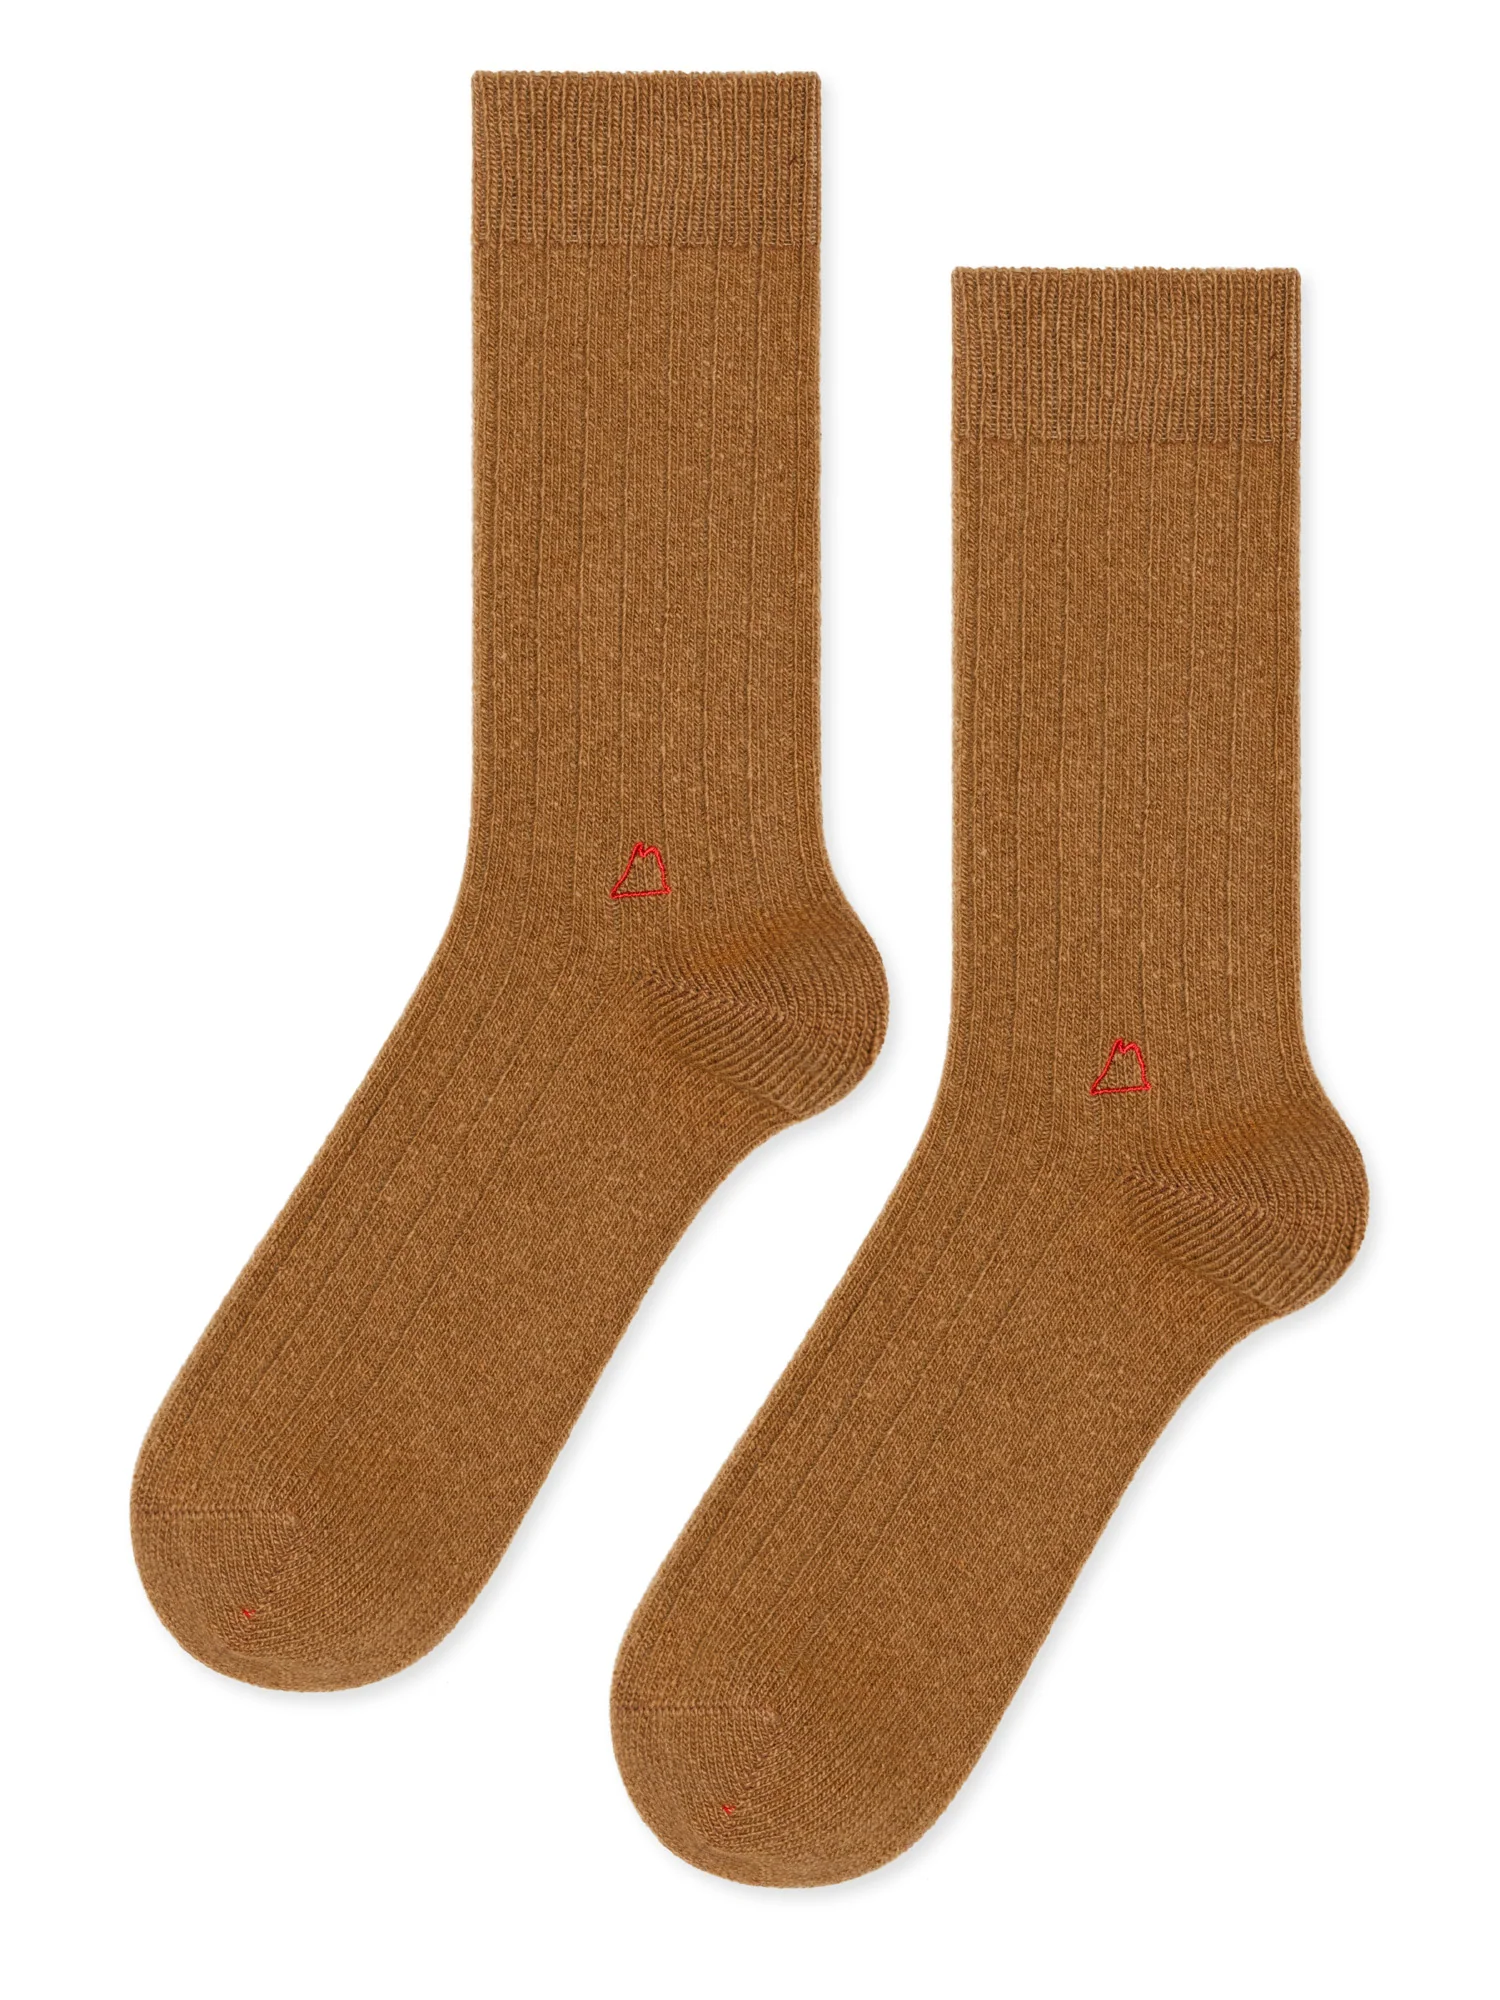 tan colored cashmere socks laid in front of a white background. 